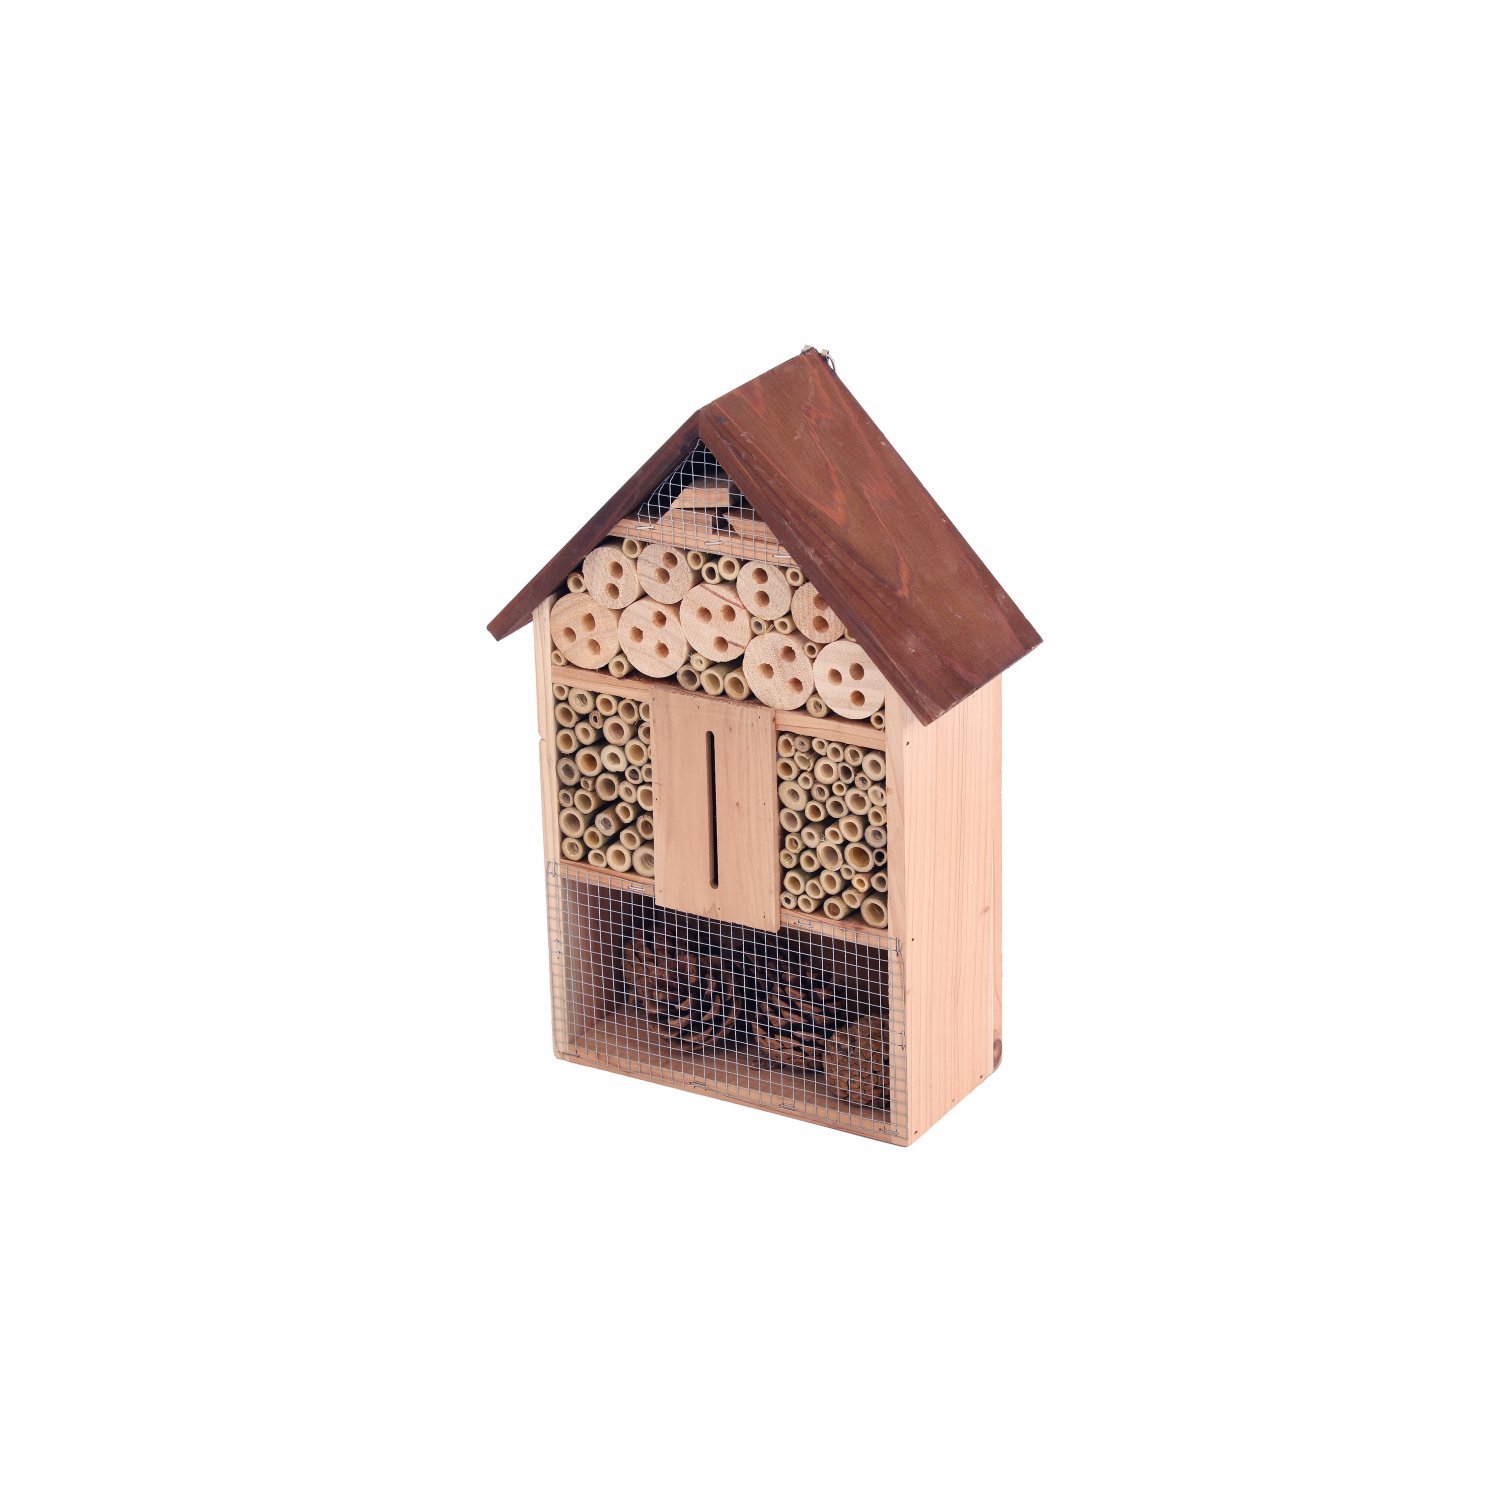 Wooden Insect Bee House Natural Wood Habitat Bug Hotel Shelter Garden Nest Box 